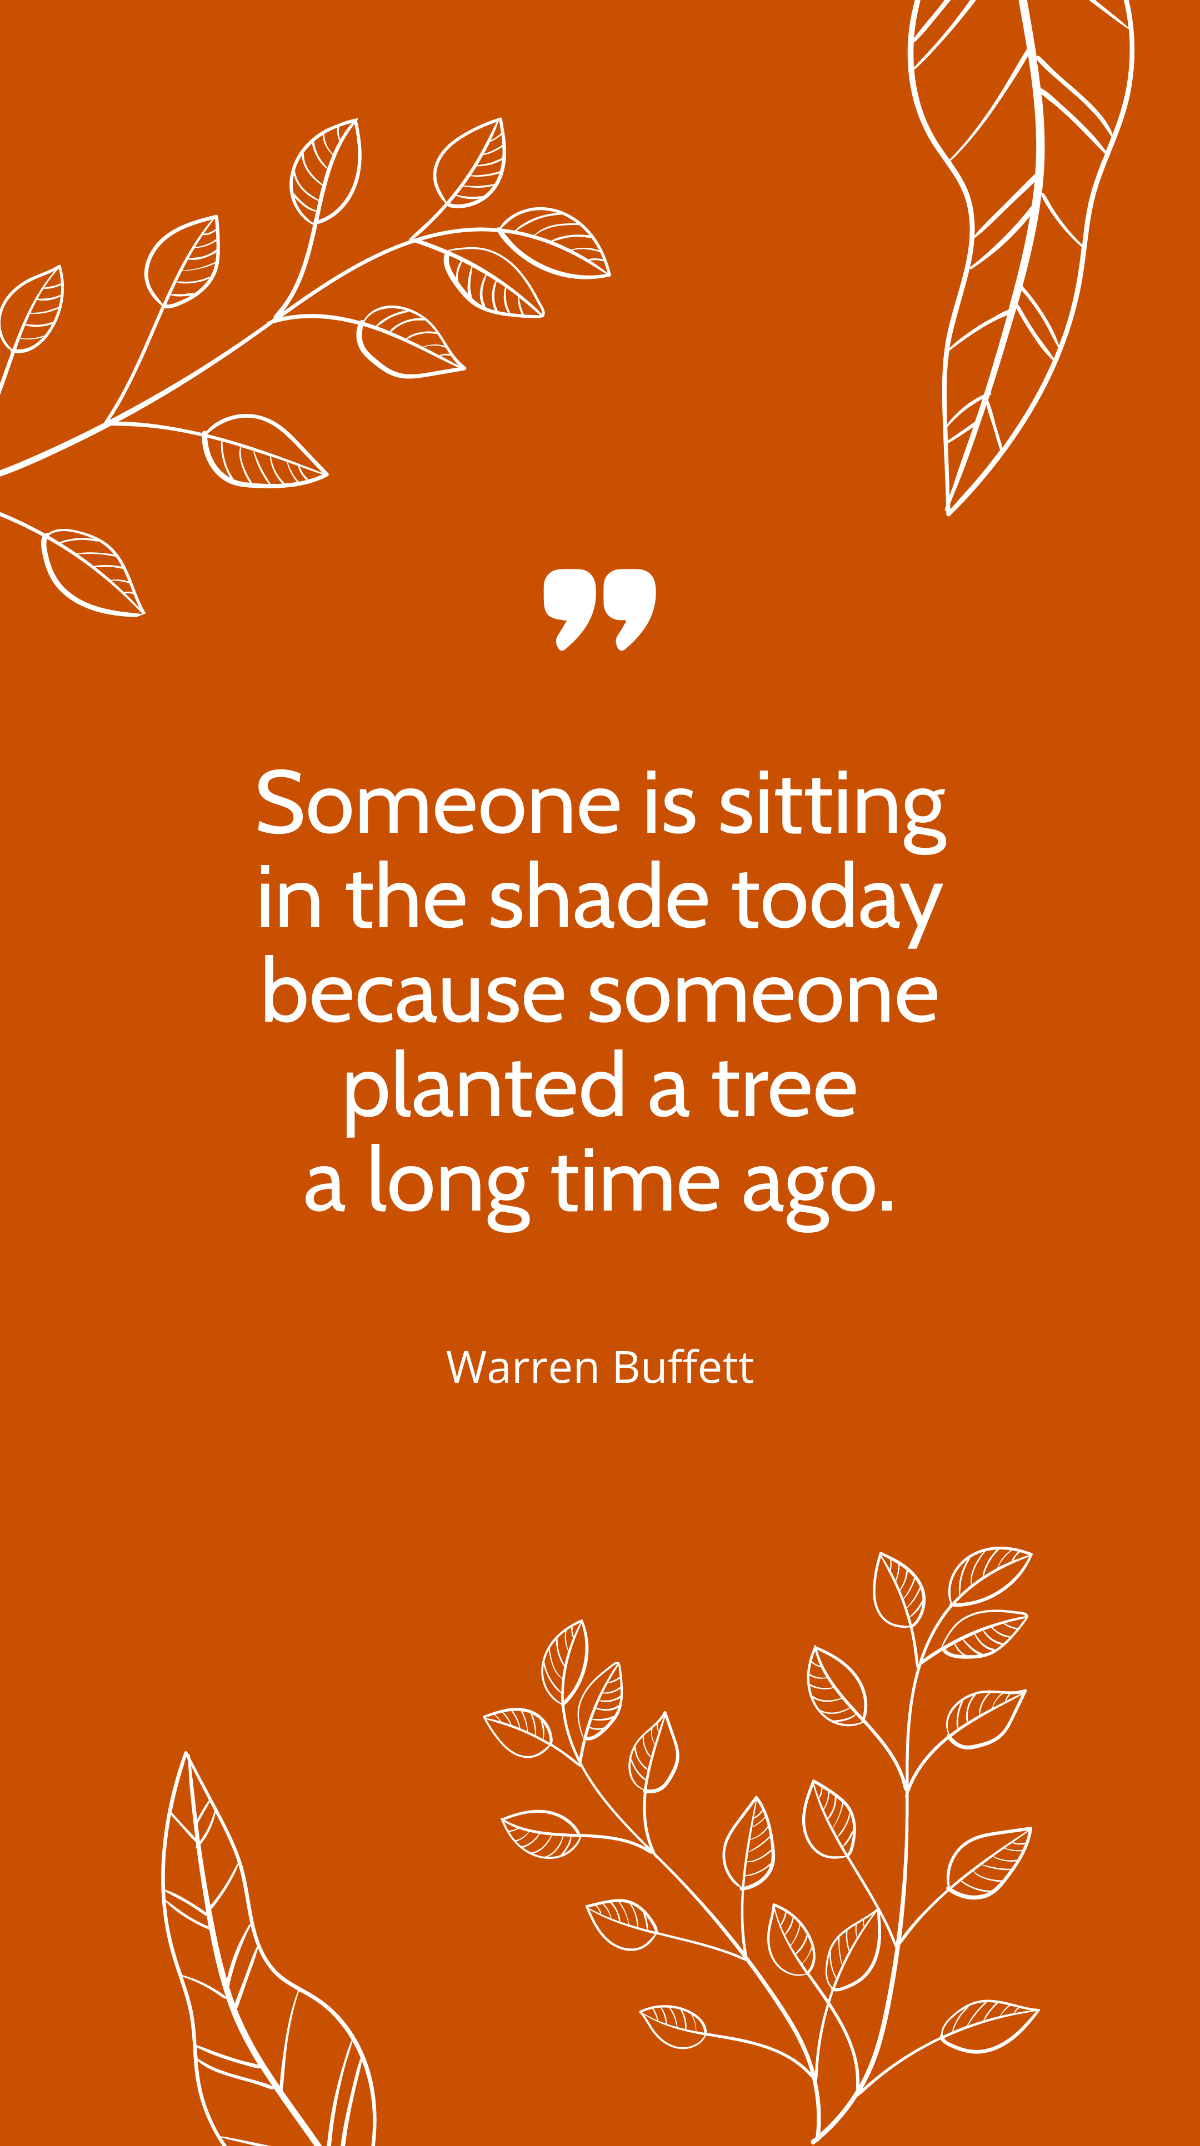 Warren Buffett - Someone is sitting in the shade today because someone planted a tree a long time ago Template